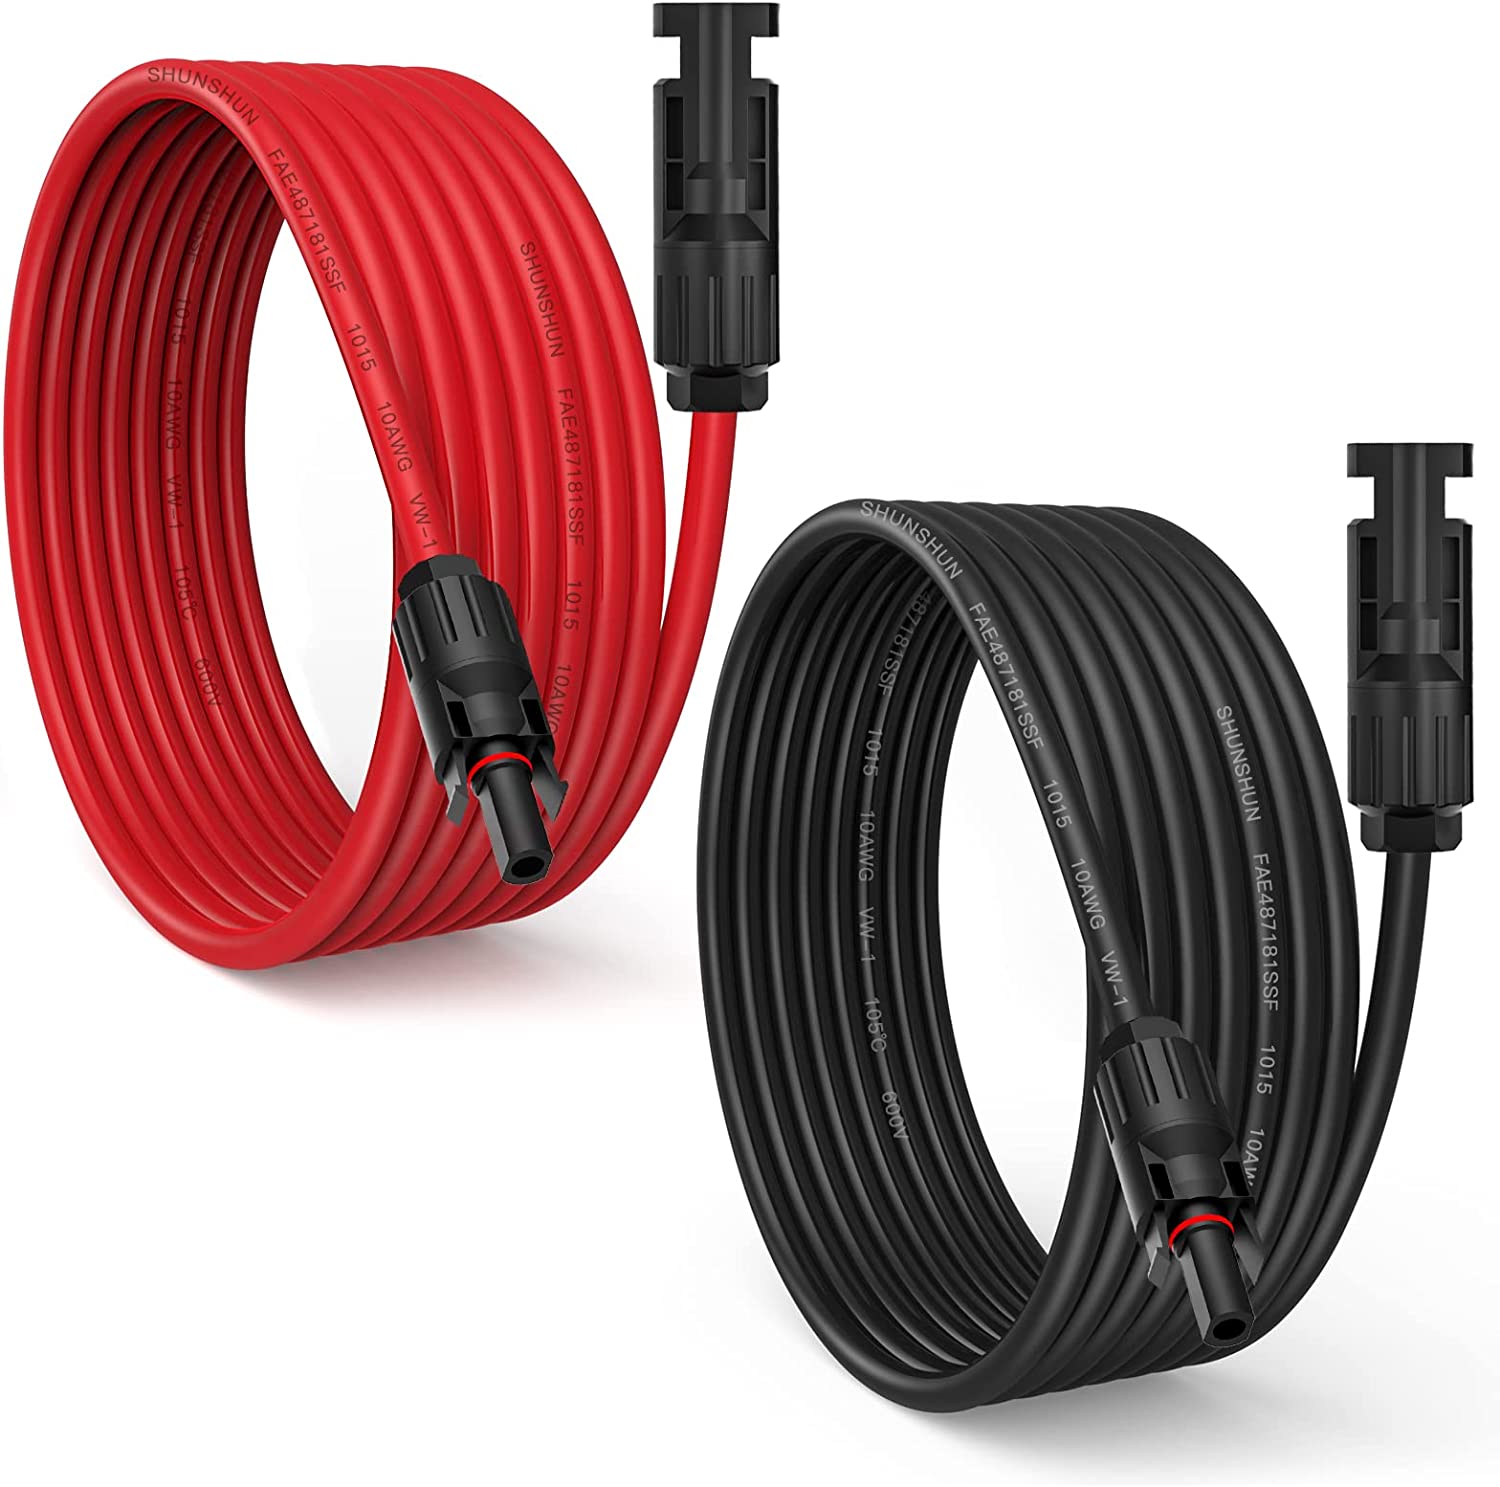 ELECTOP Solar Extension Cable Wire 10 Feet, 10AWG Solar Panel Cable with Weatherproof Female and Male Connector Adapter Kit for Solar Generator House Boat RV(10FT Red + 10FT Black)